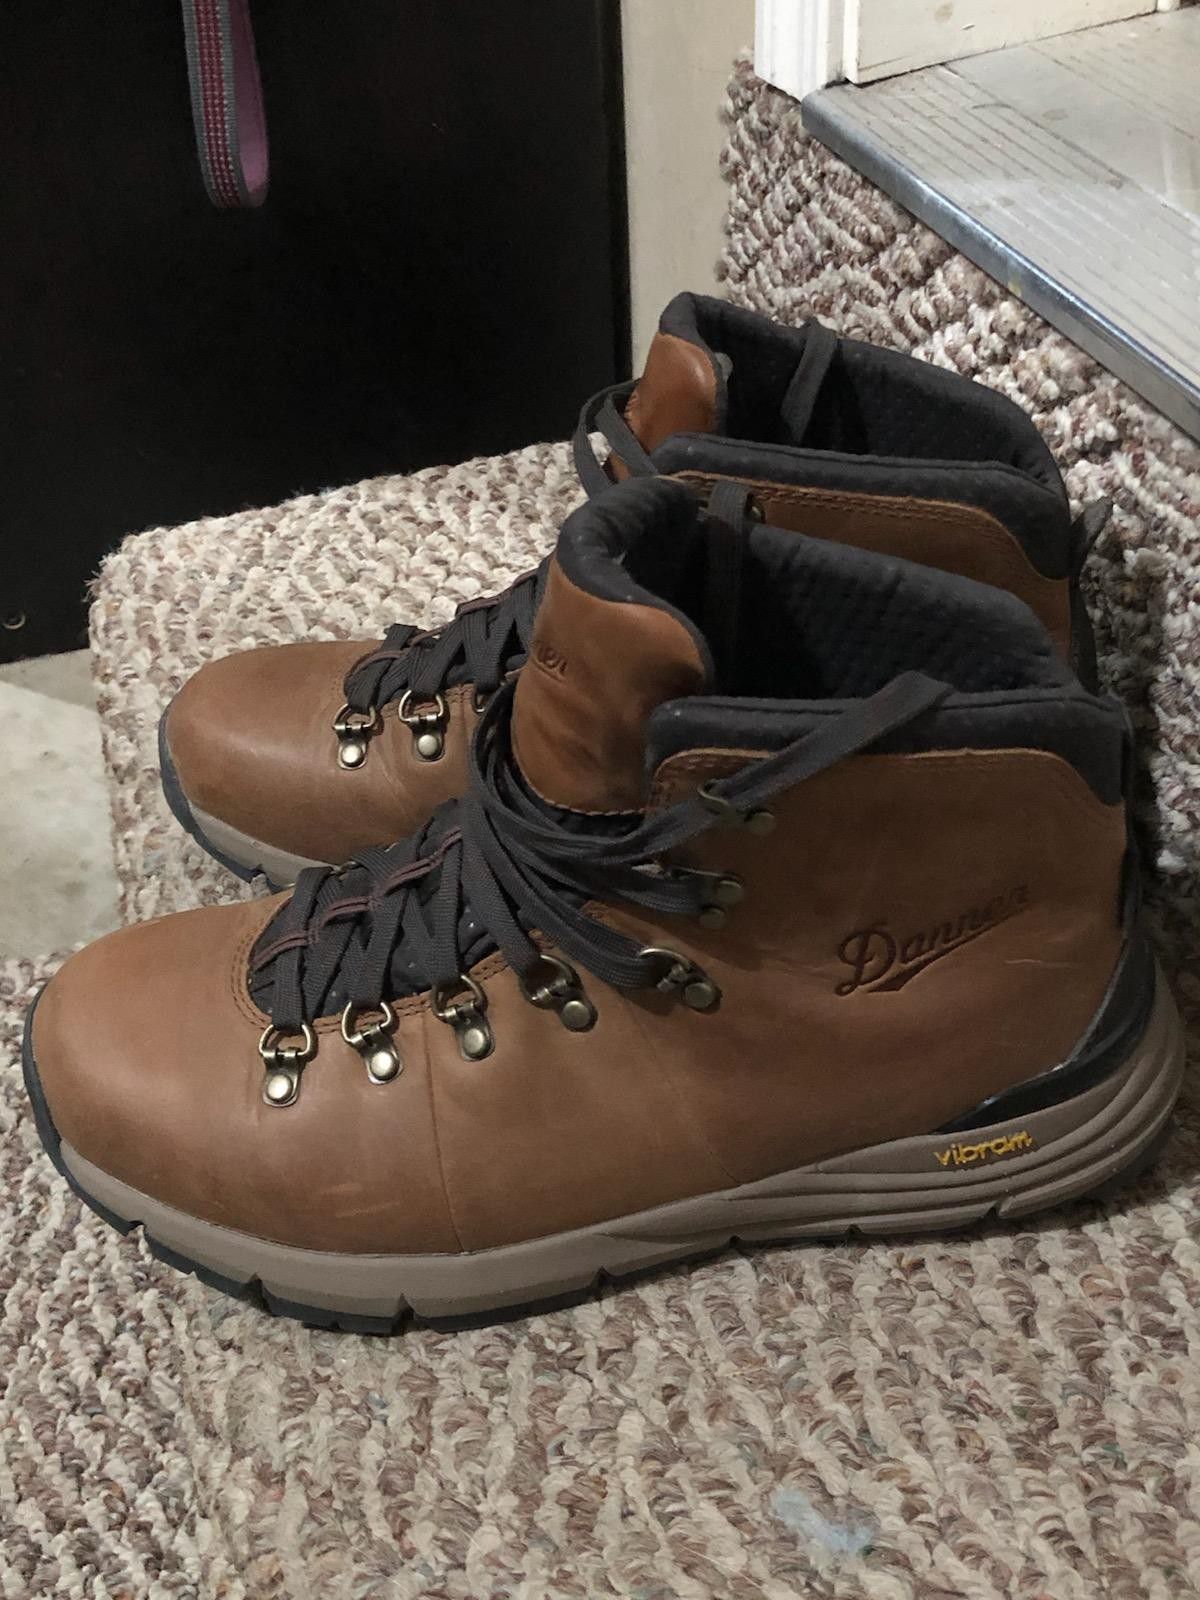 Danner men's hiking boots size 8